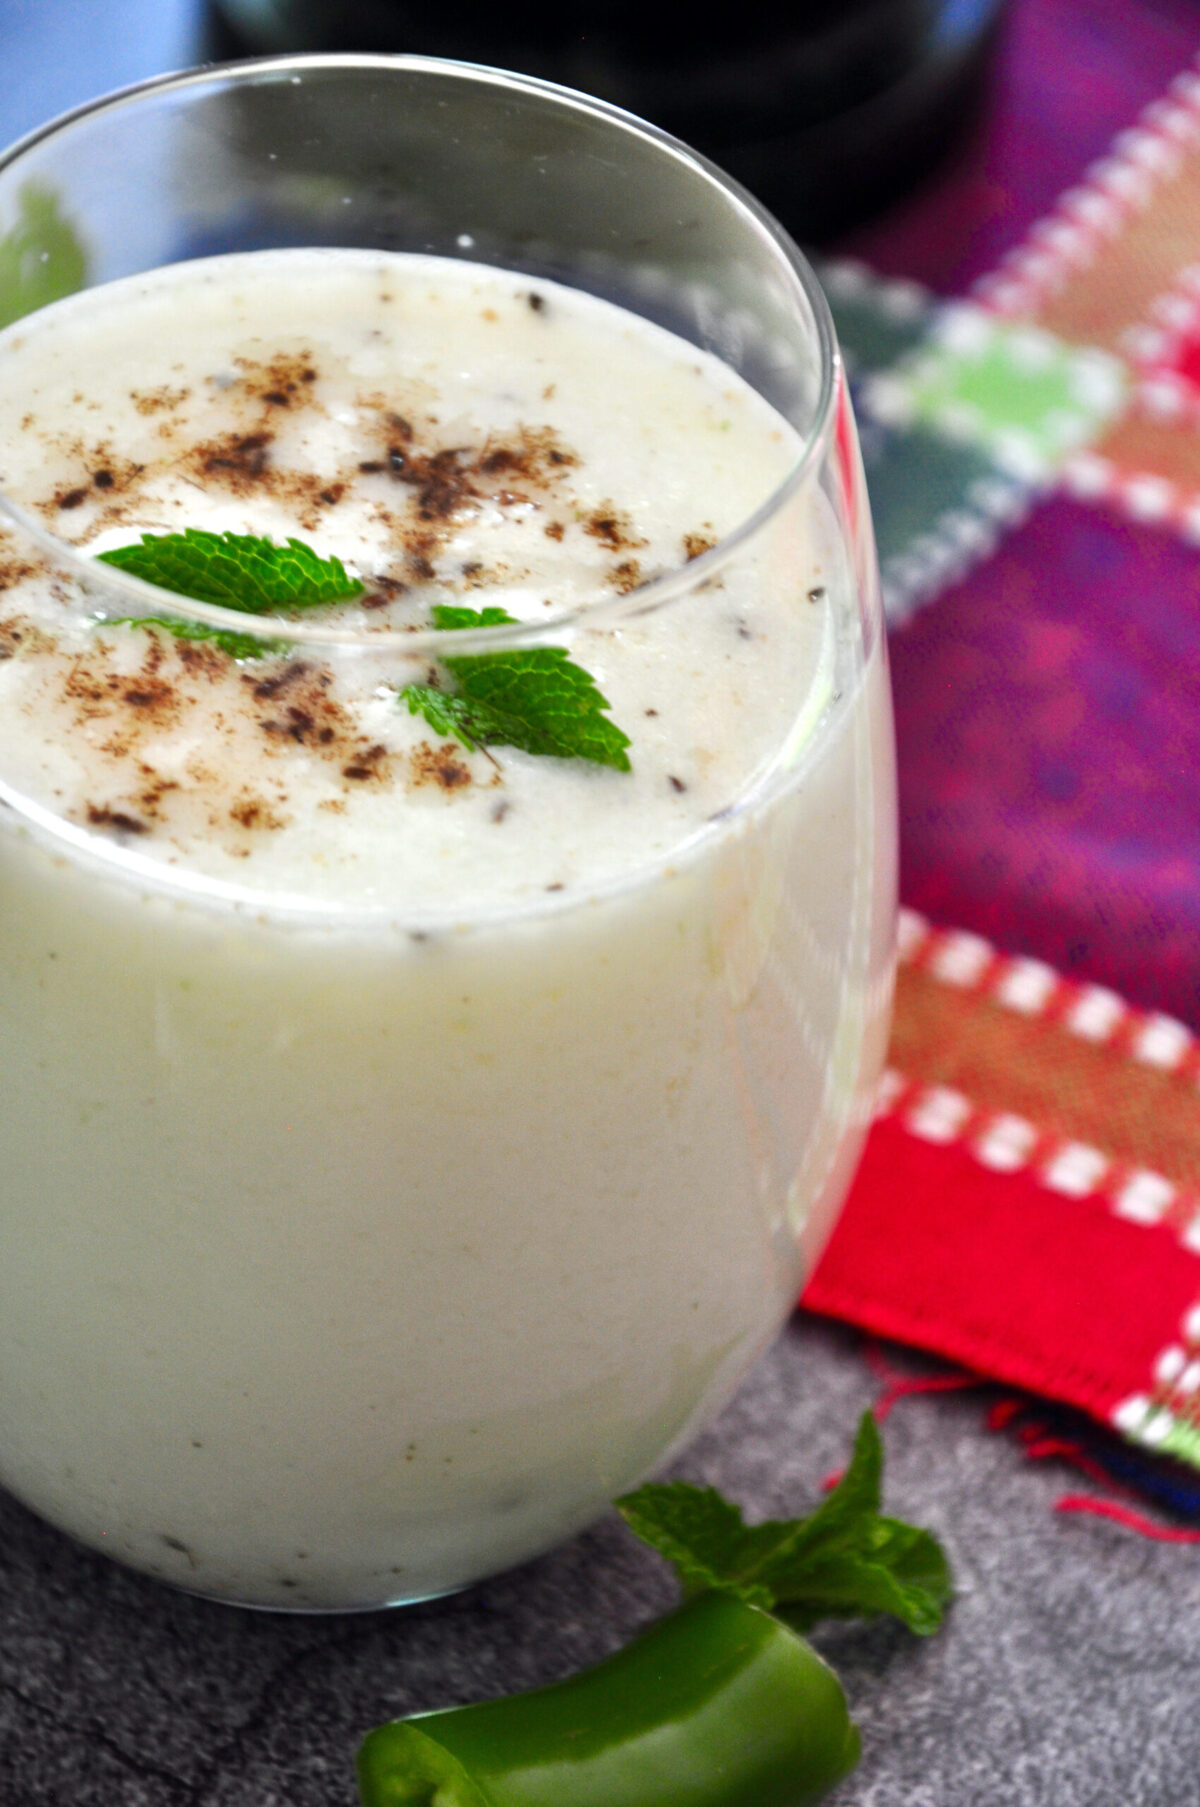 spiced buttermilk in a glass and garnished with roasted cumin powder and mint leaves